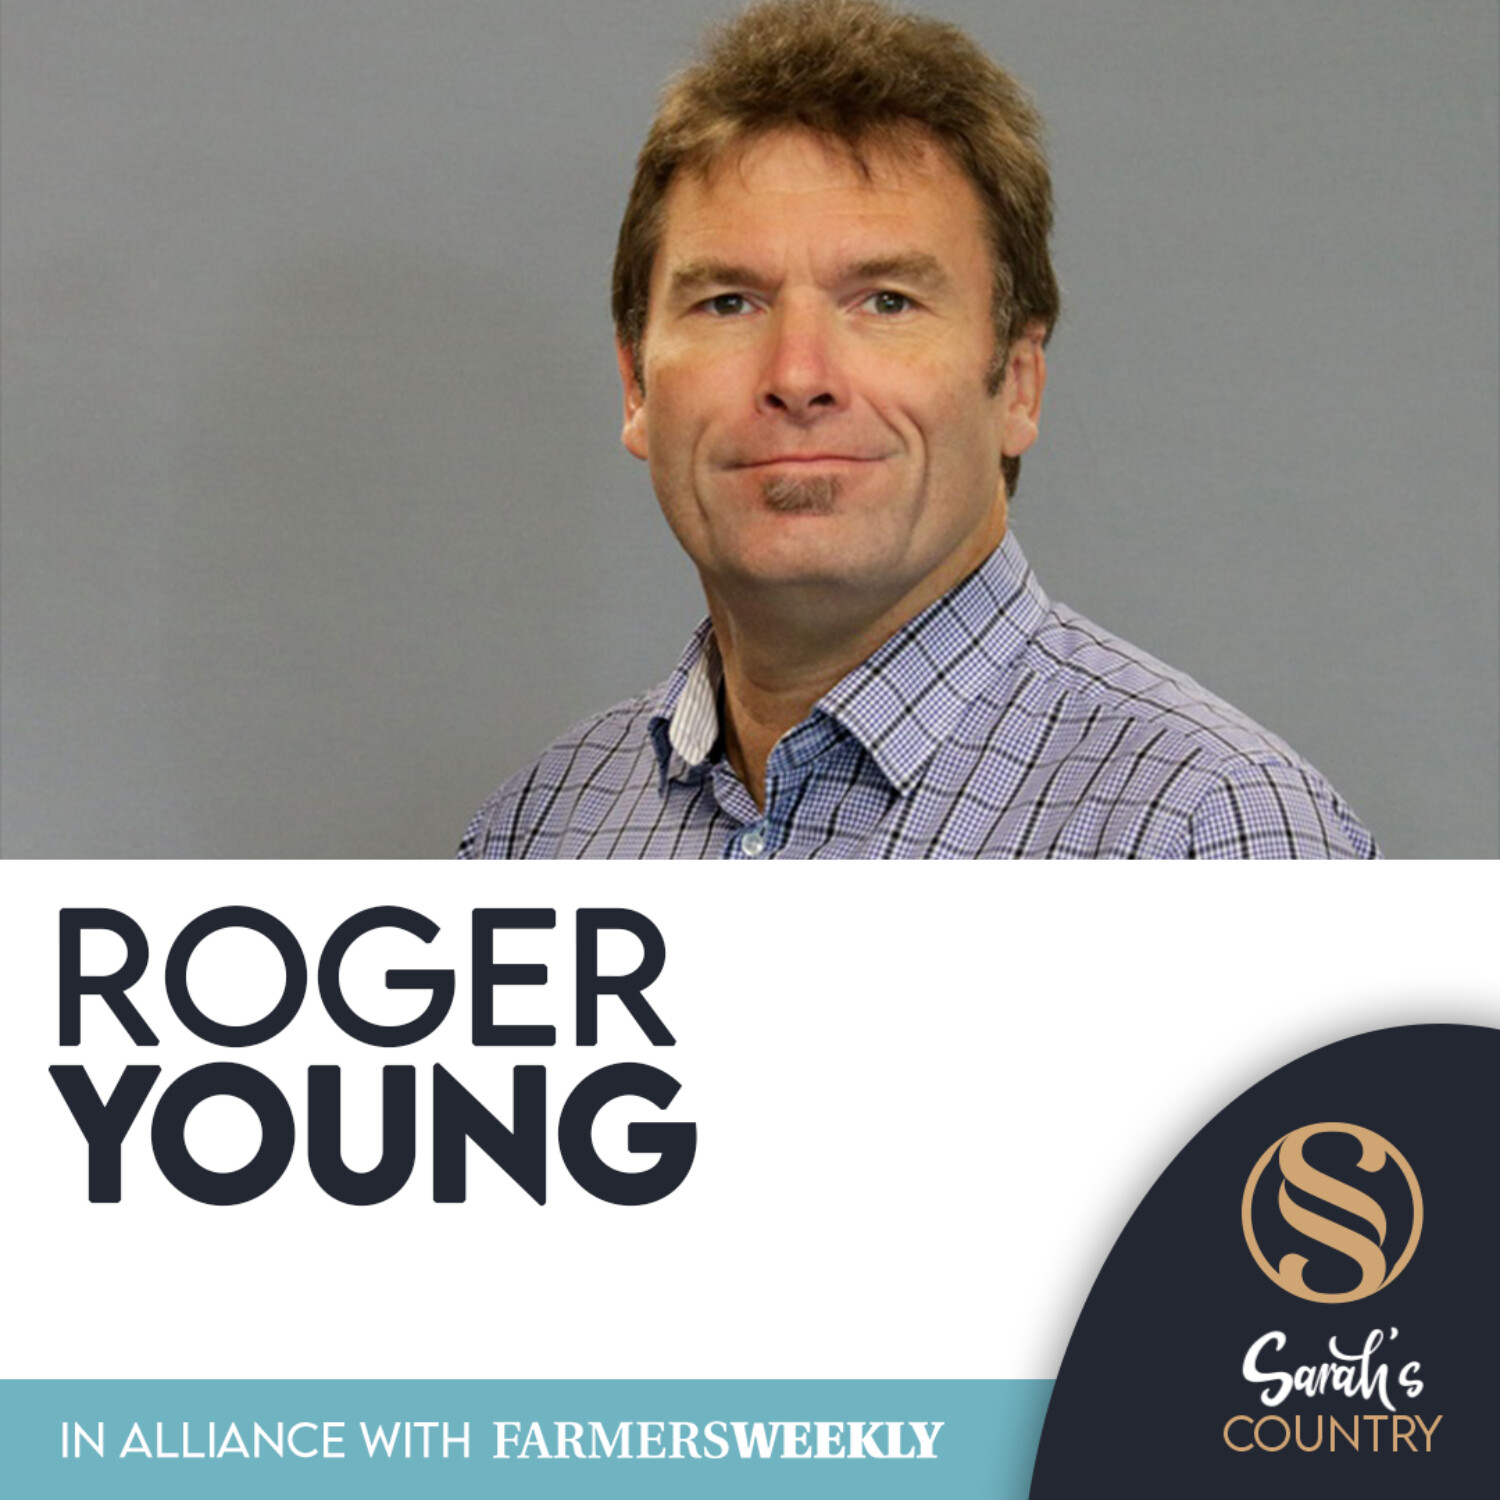 Roger Young | “Register to record farmers efforts”